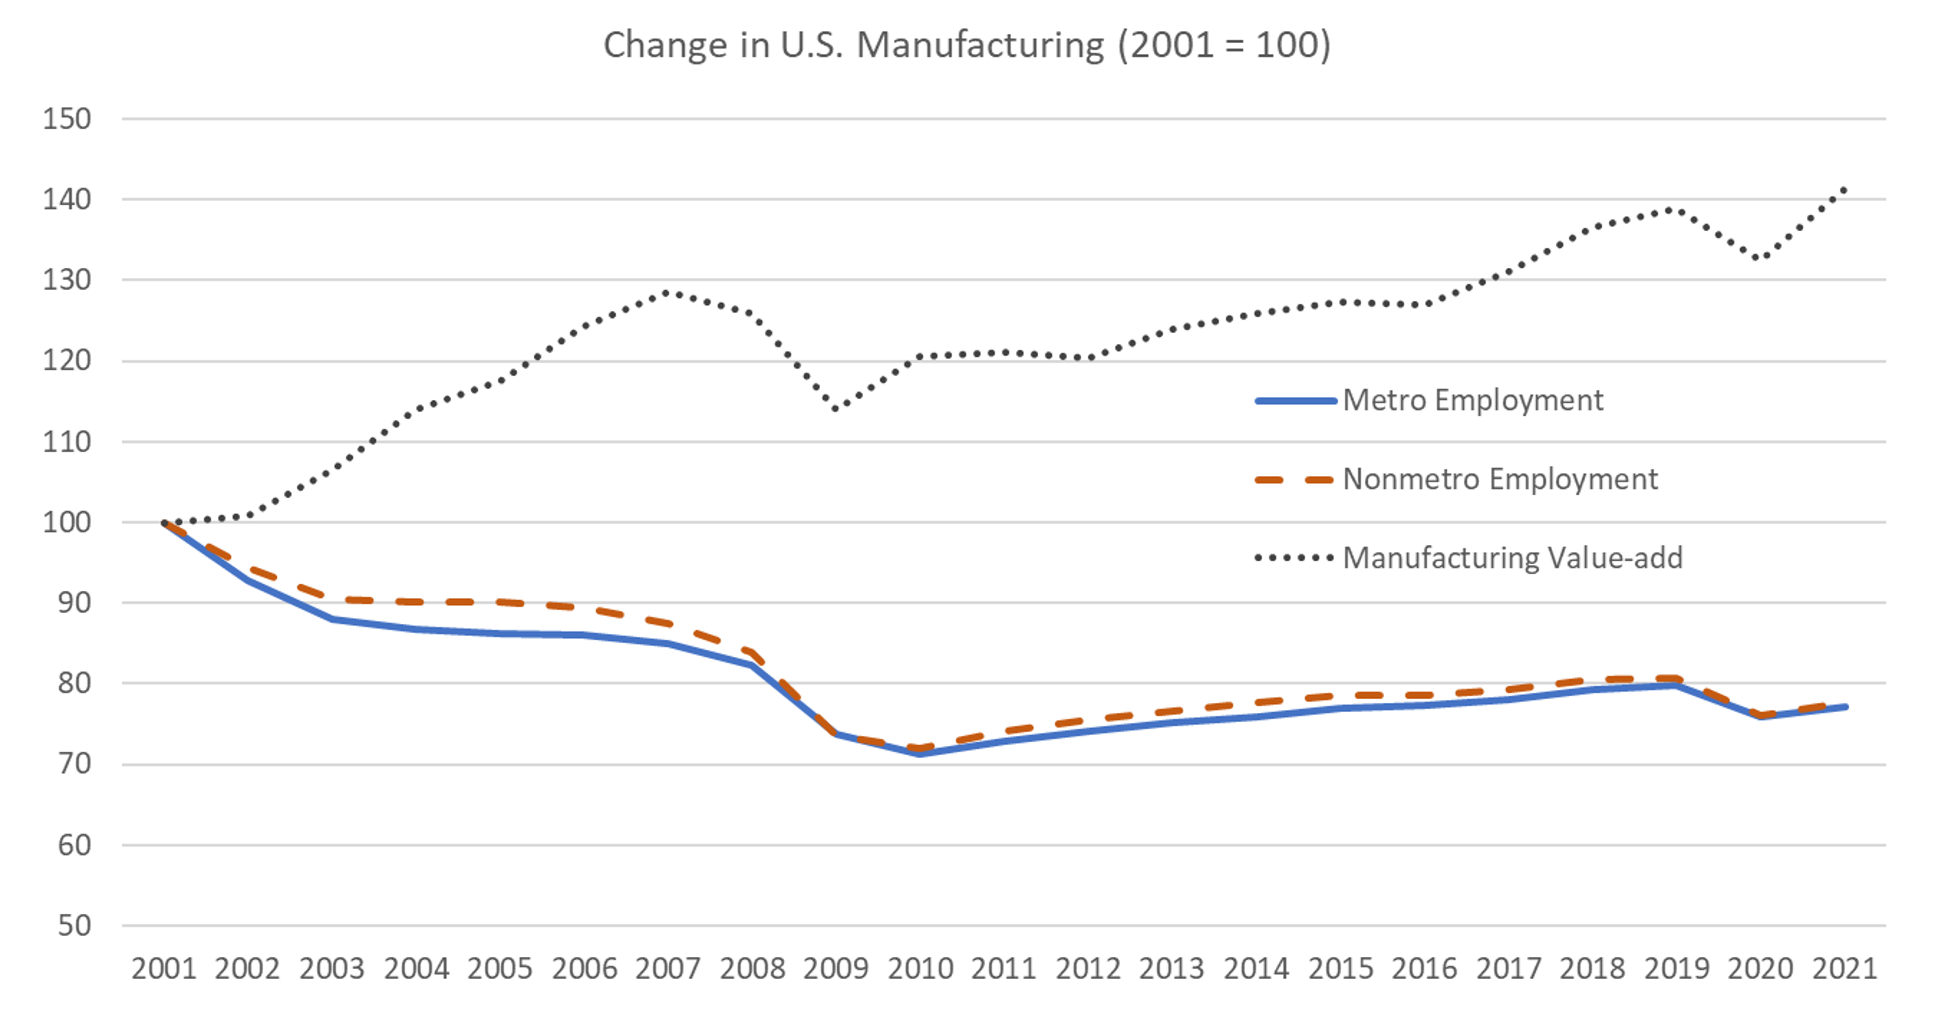 Figure 2. Manufacturing employment and output, 2001-2021. See accessible link for data.